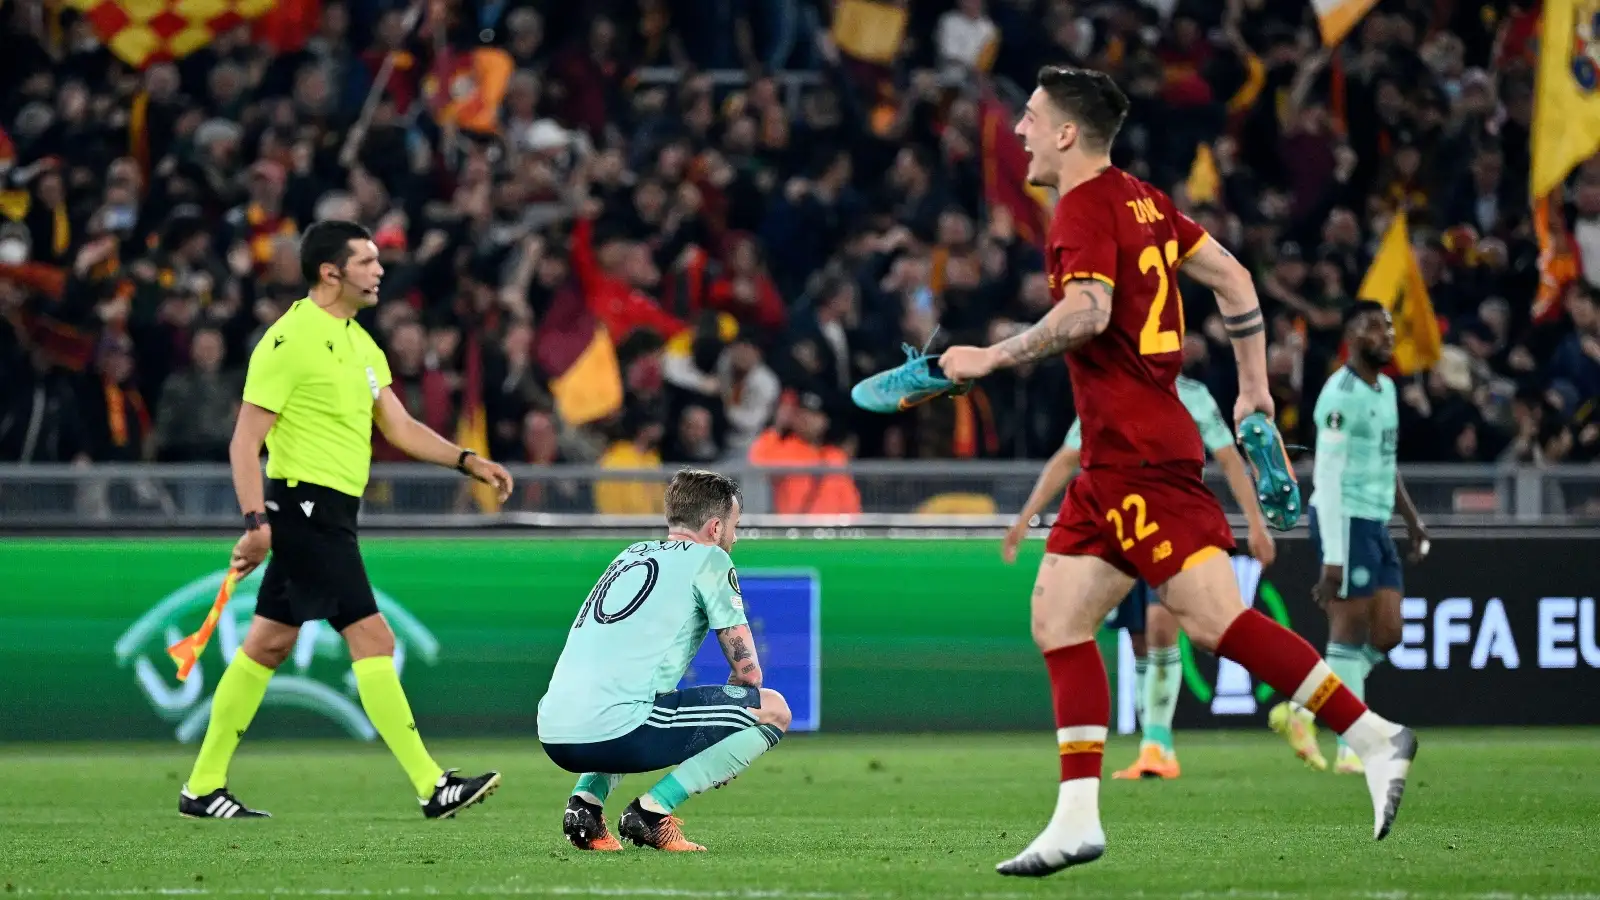 Roma vs Leicester - James Maddison looks dejected after a loss